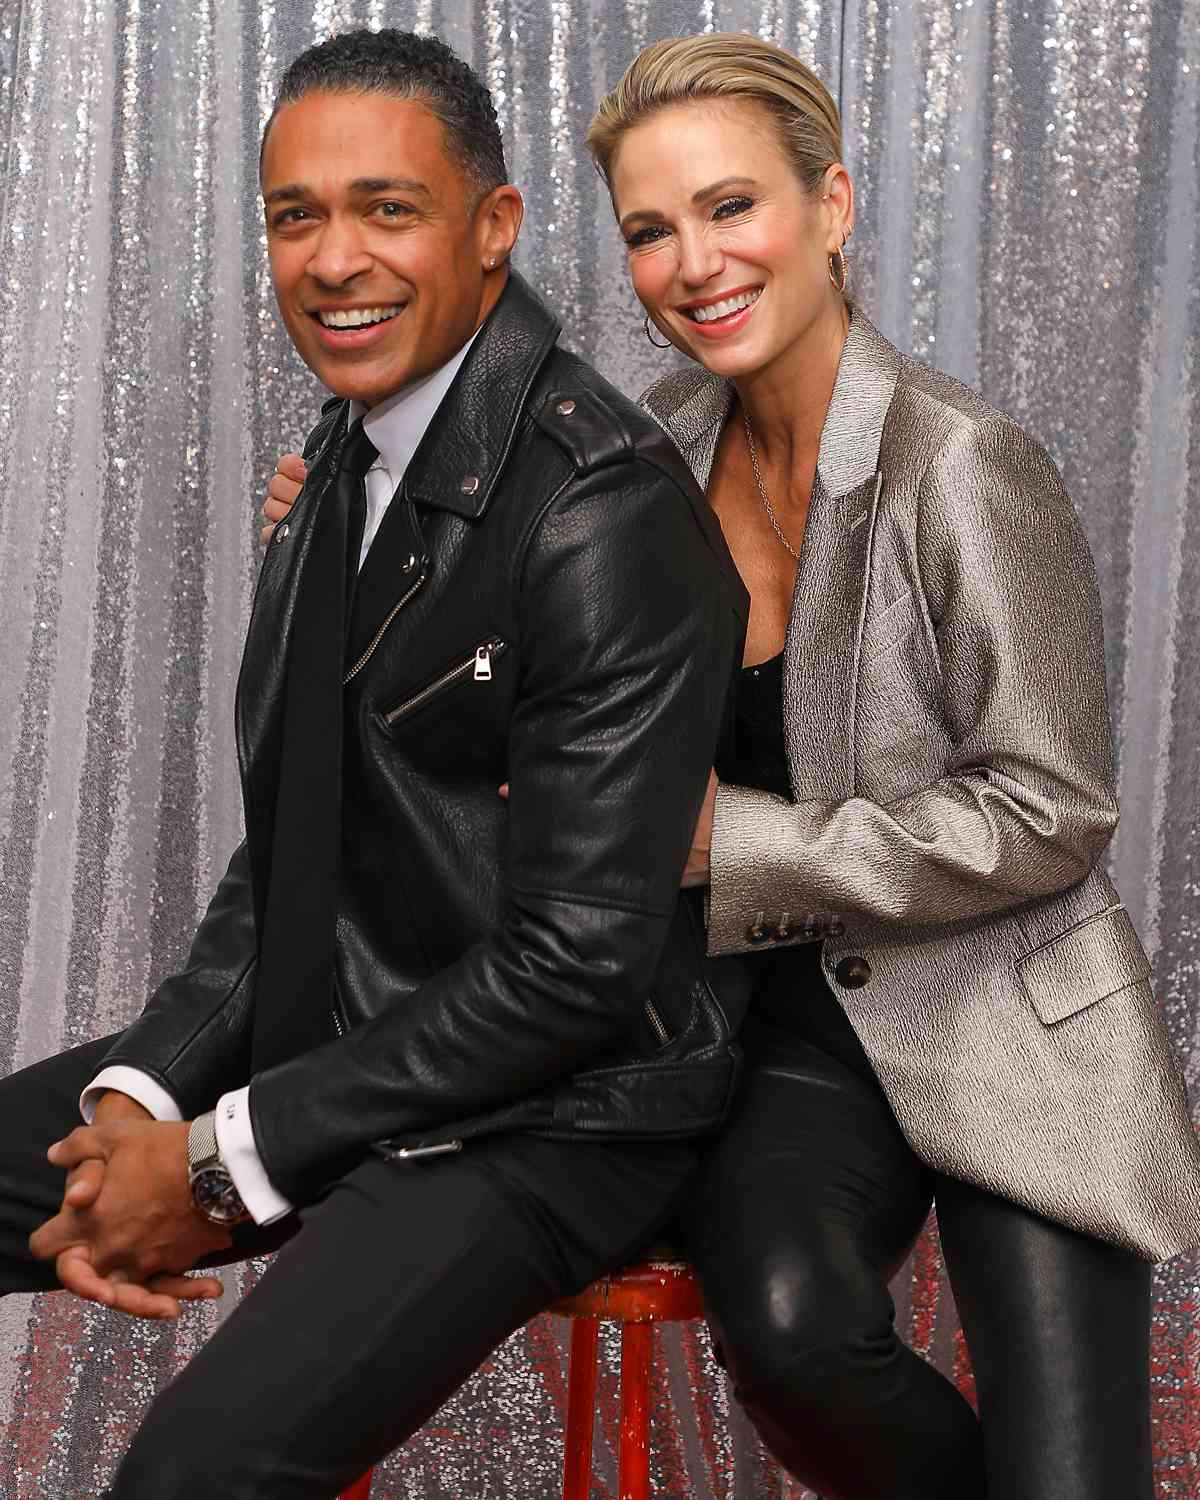 T.J. Holmes and Amy Robach are photographed backstage at iHeartRadio Jingle Ball 2023 at Madison Square Garden on December 8, 2023